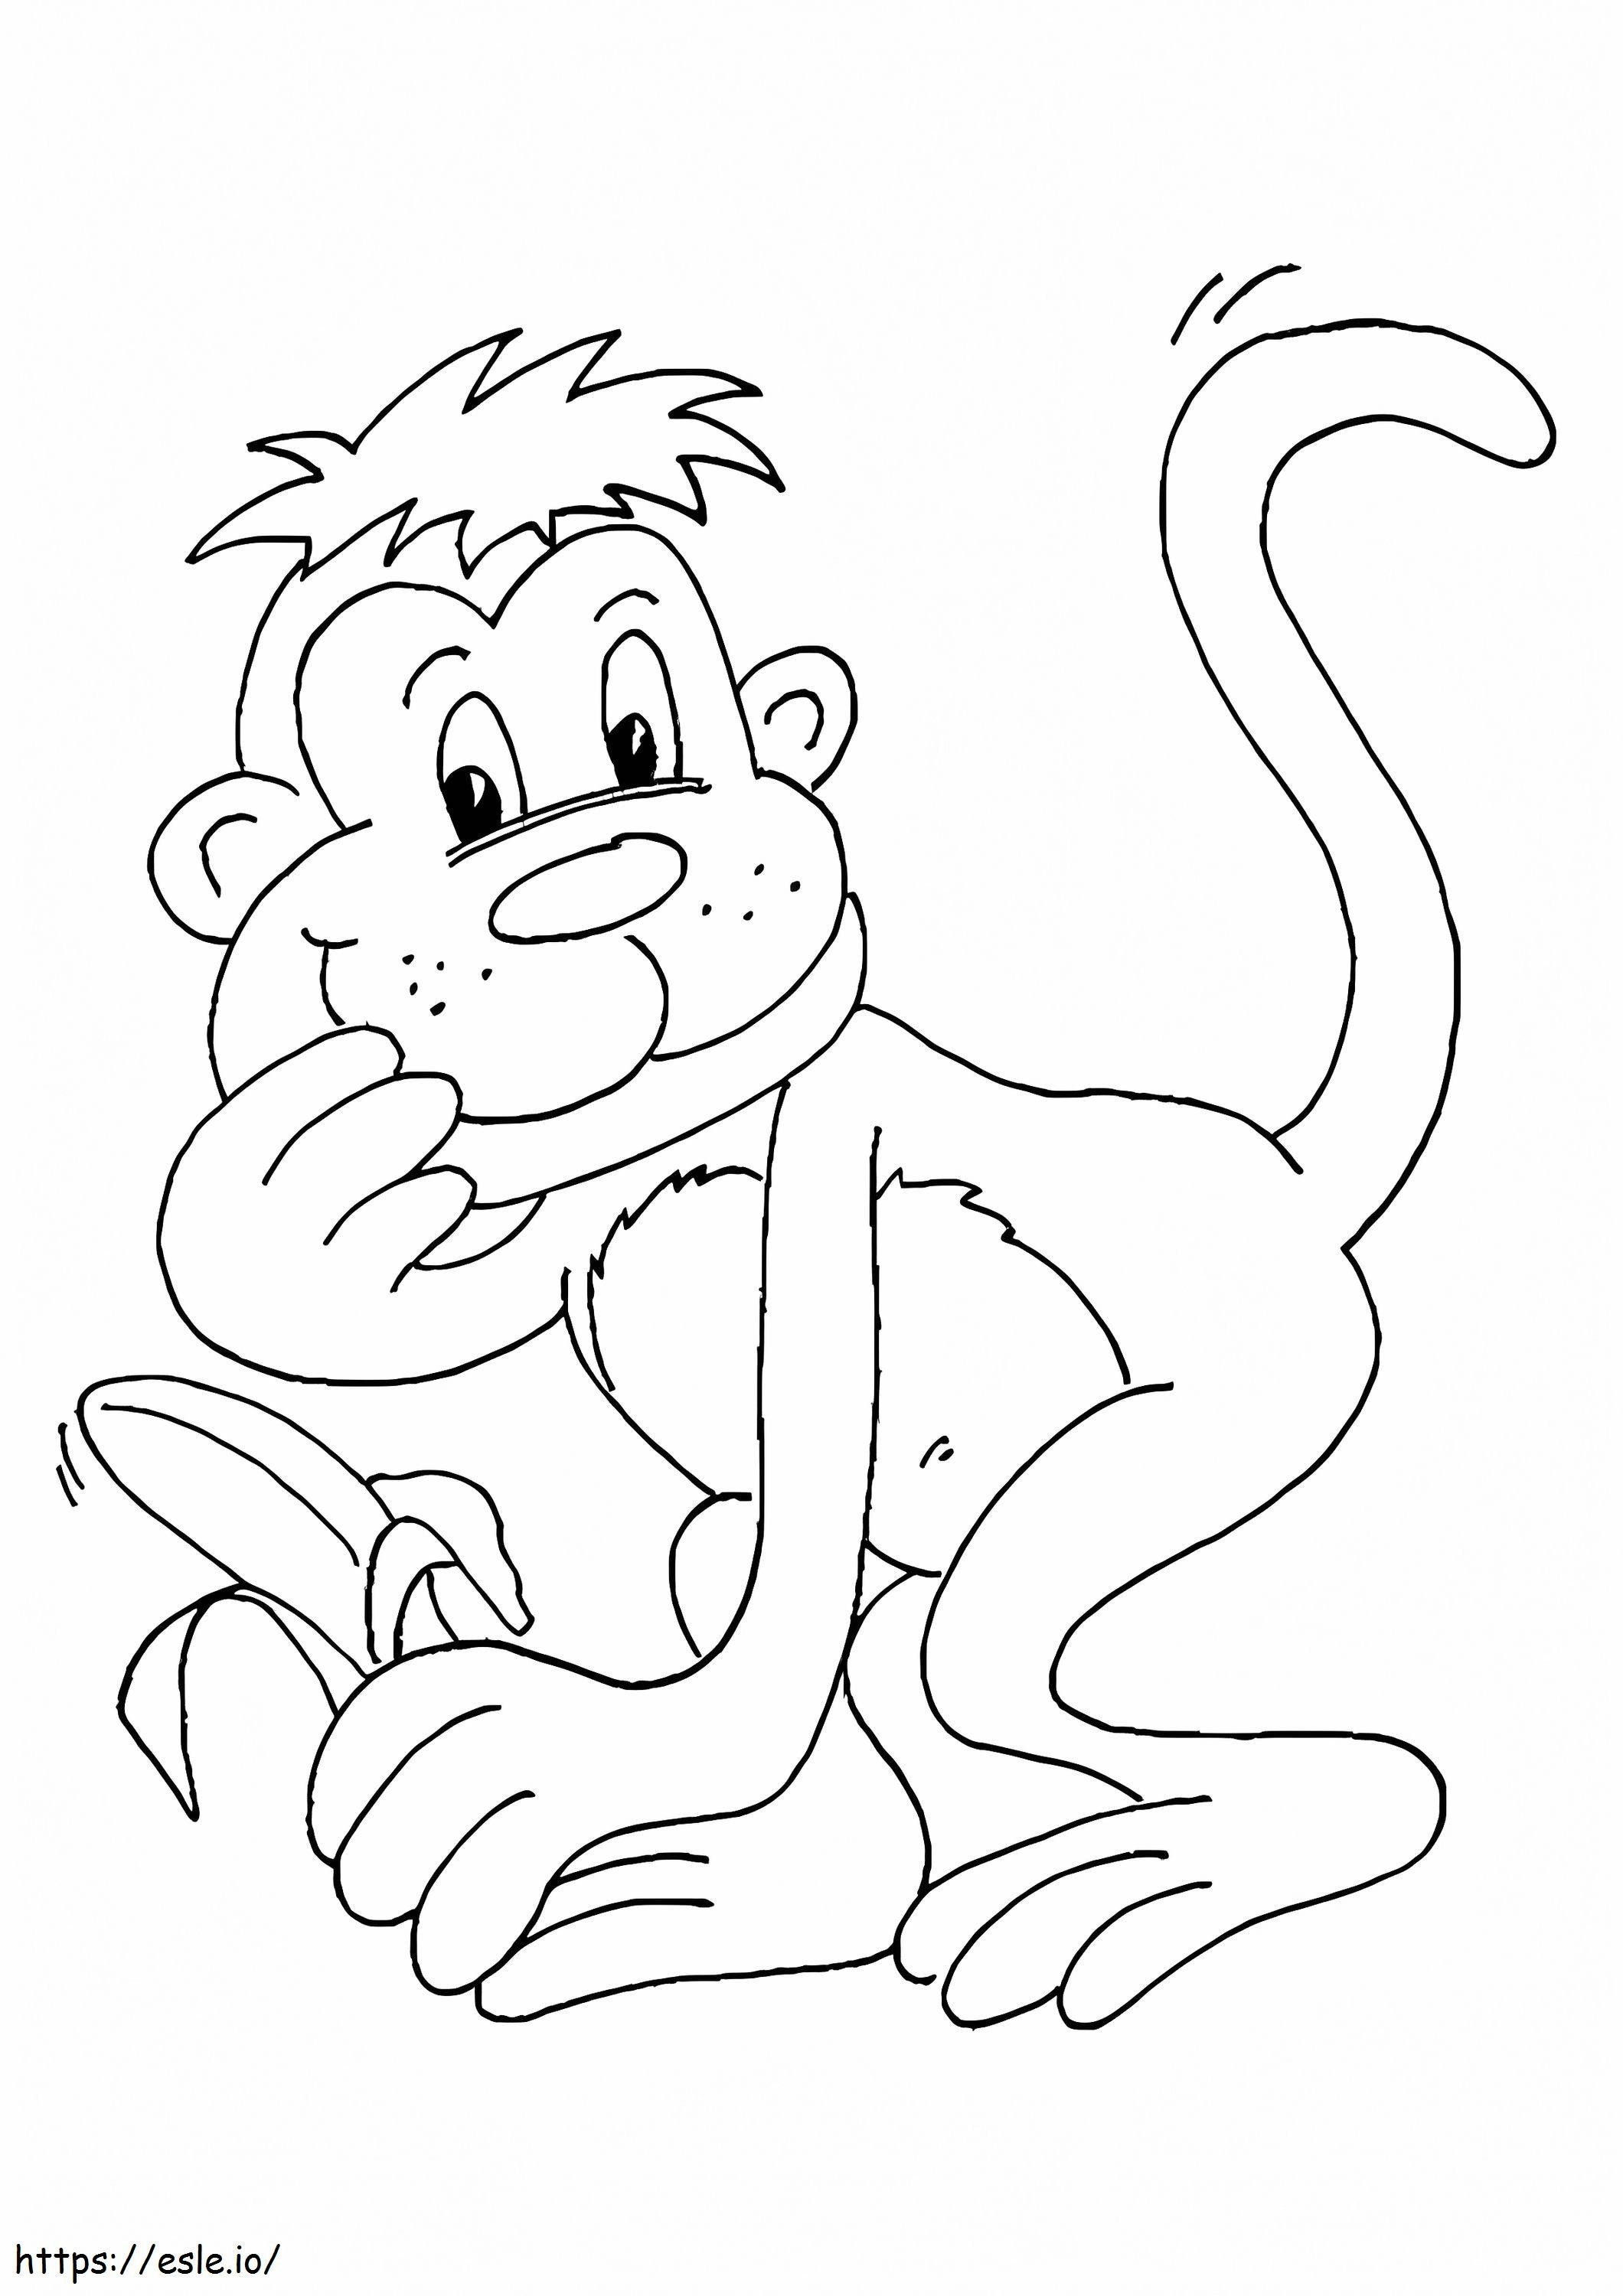 Monkey Holding A Banana coloring page